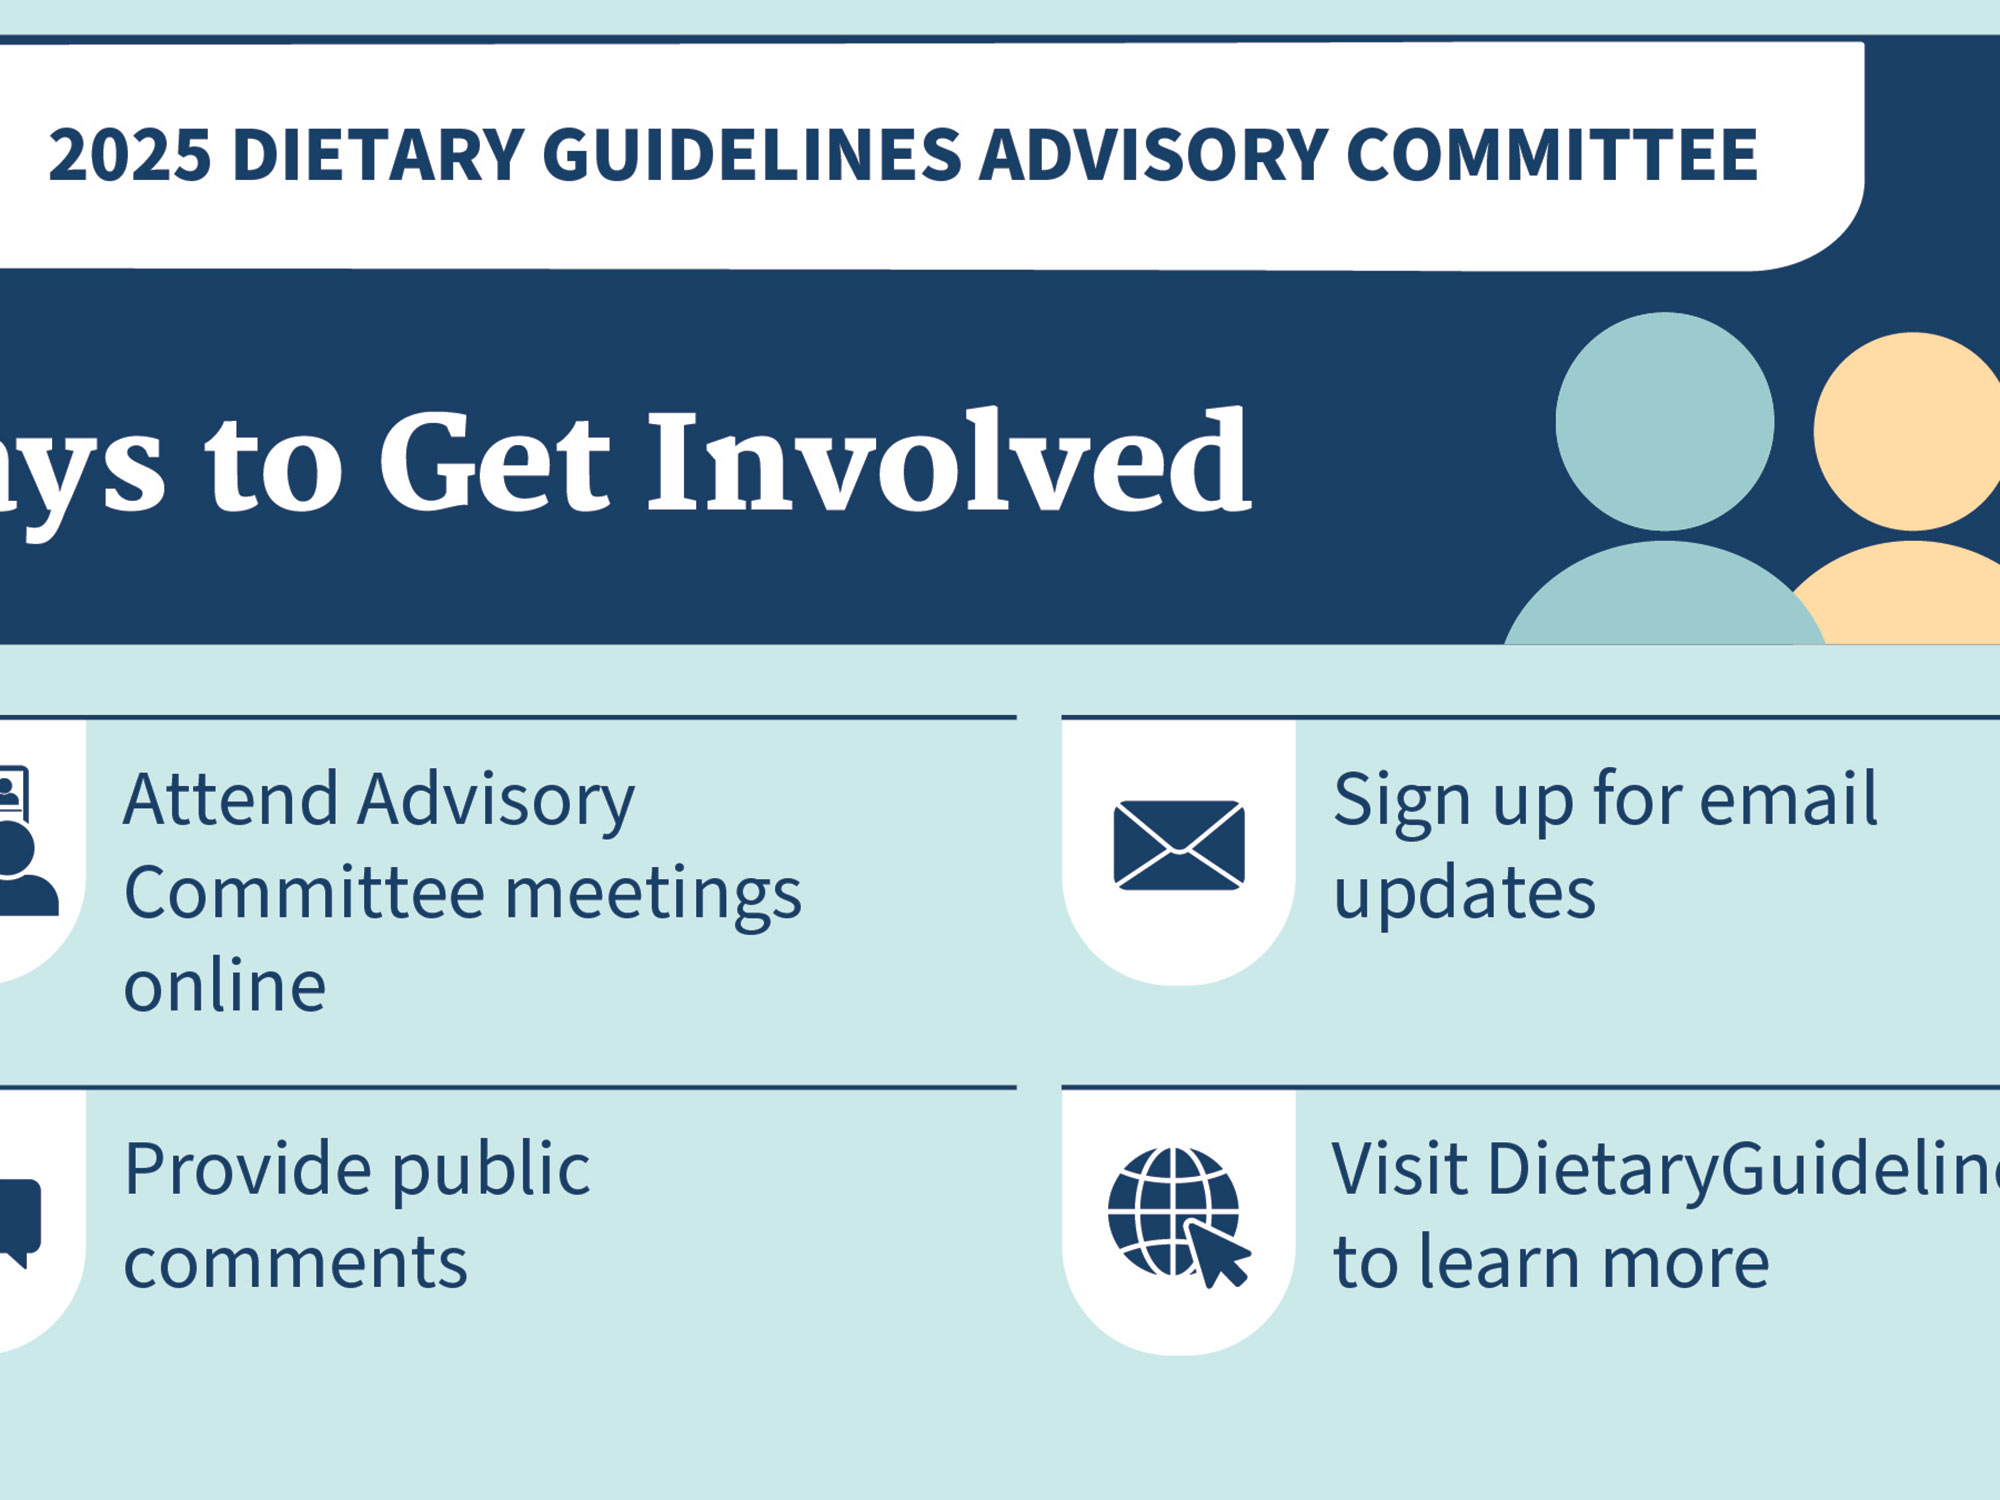 Dietary Guidelines Advisory Committee blue social media tile citing ways to get involved